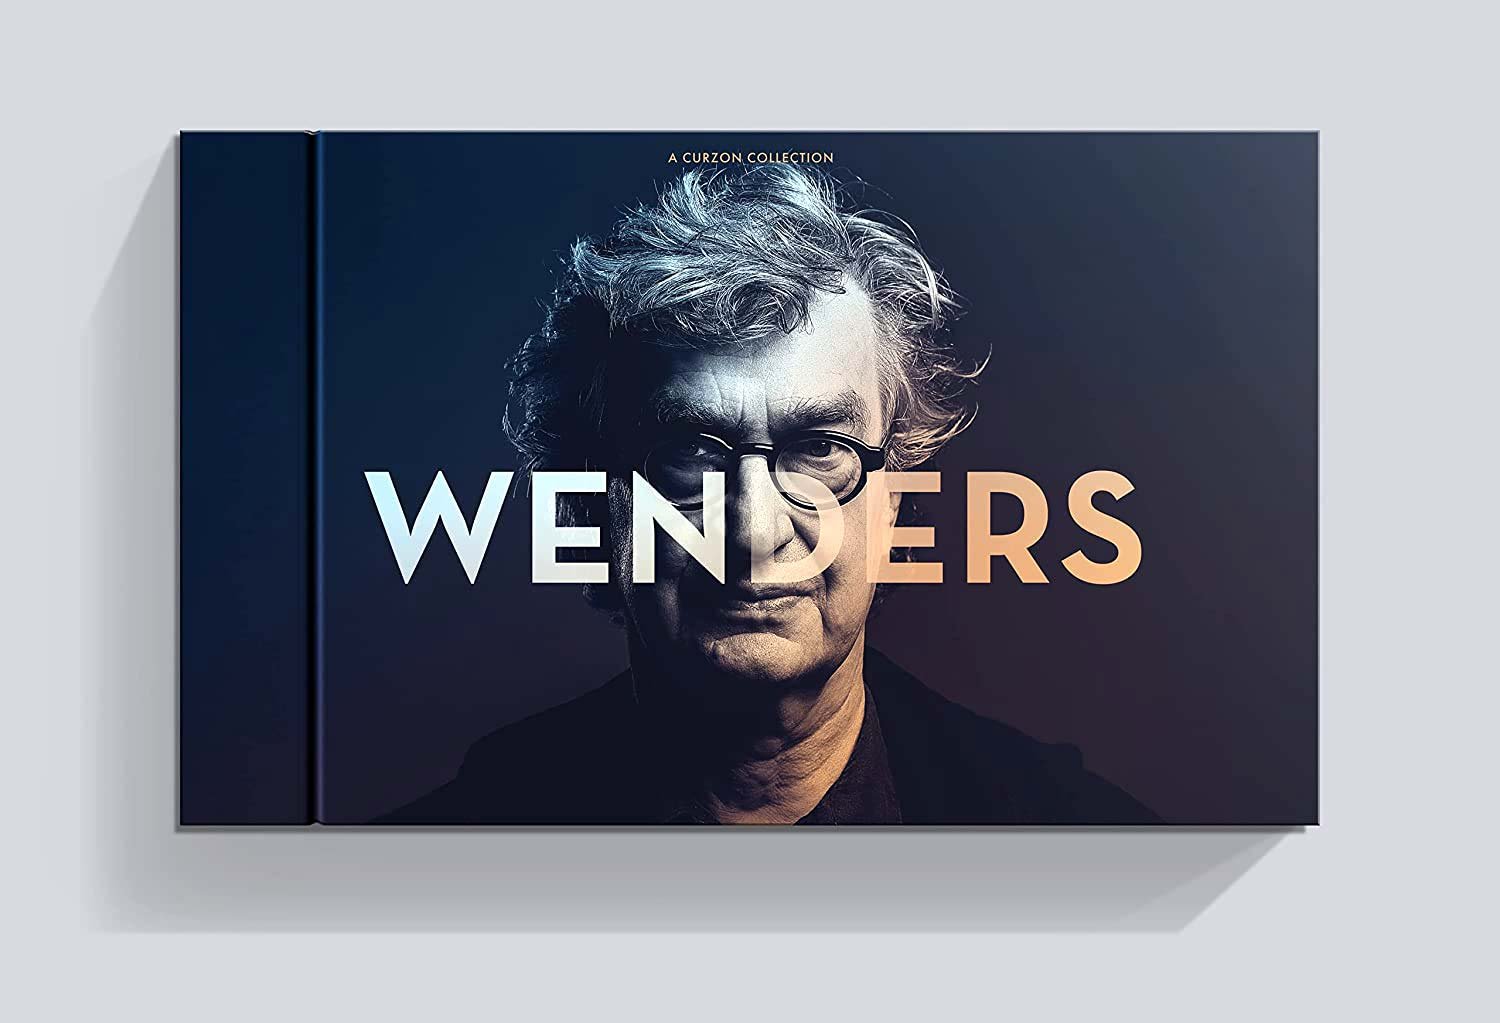 CD Shop - MOVIE WIM WENDERS: A CURZON COLLECTION